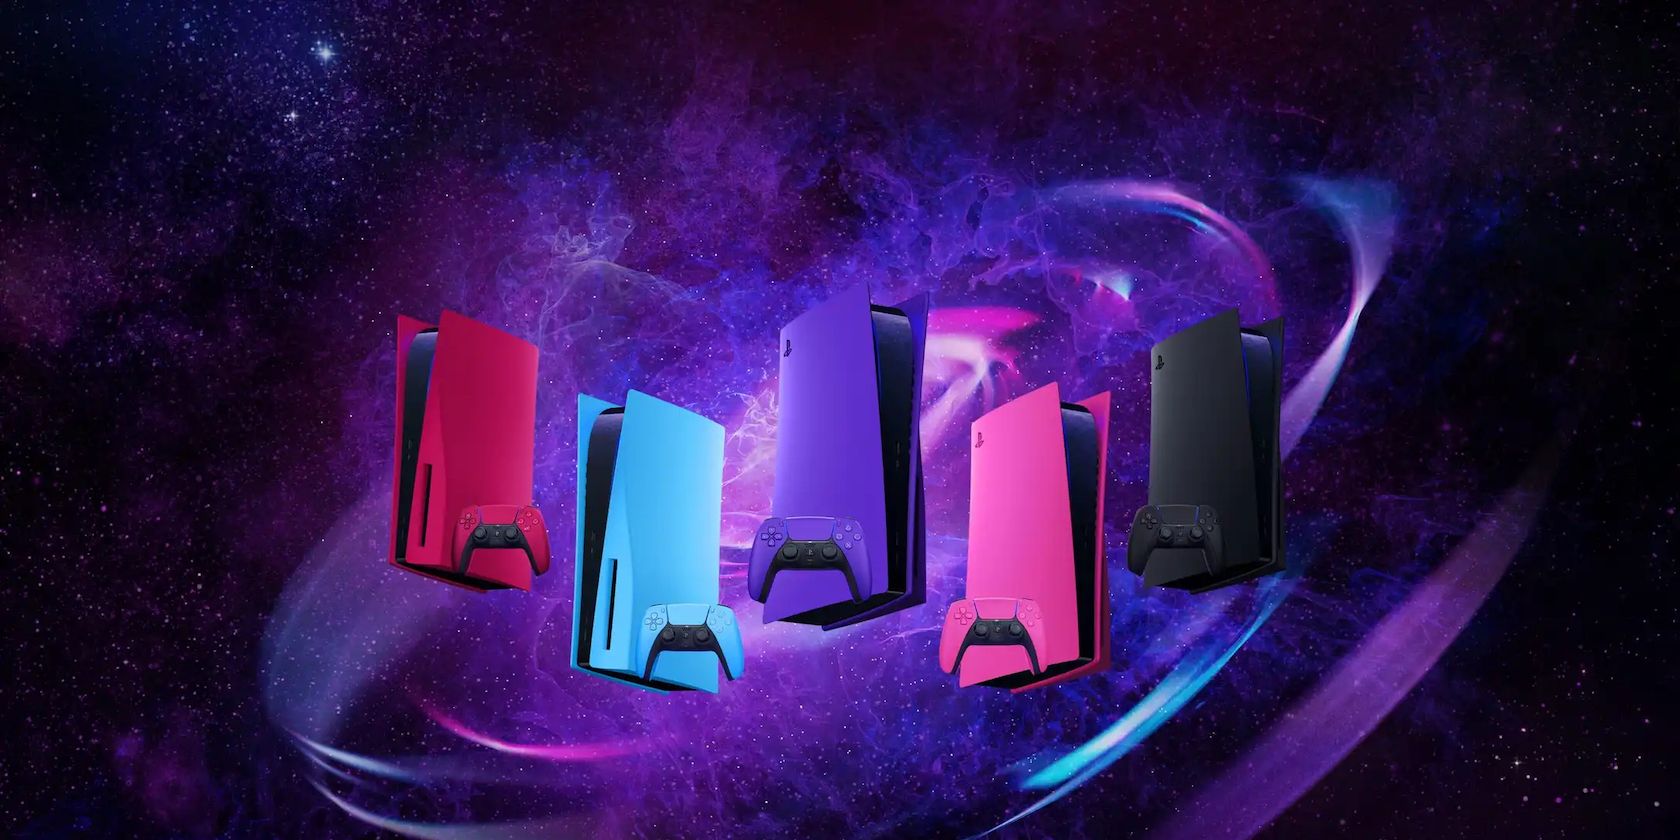 5 PS5 console covers with a galaxy theme